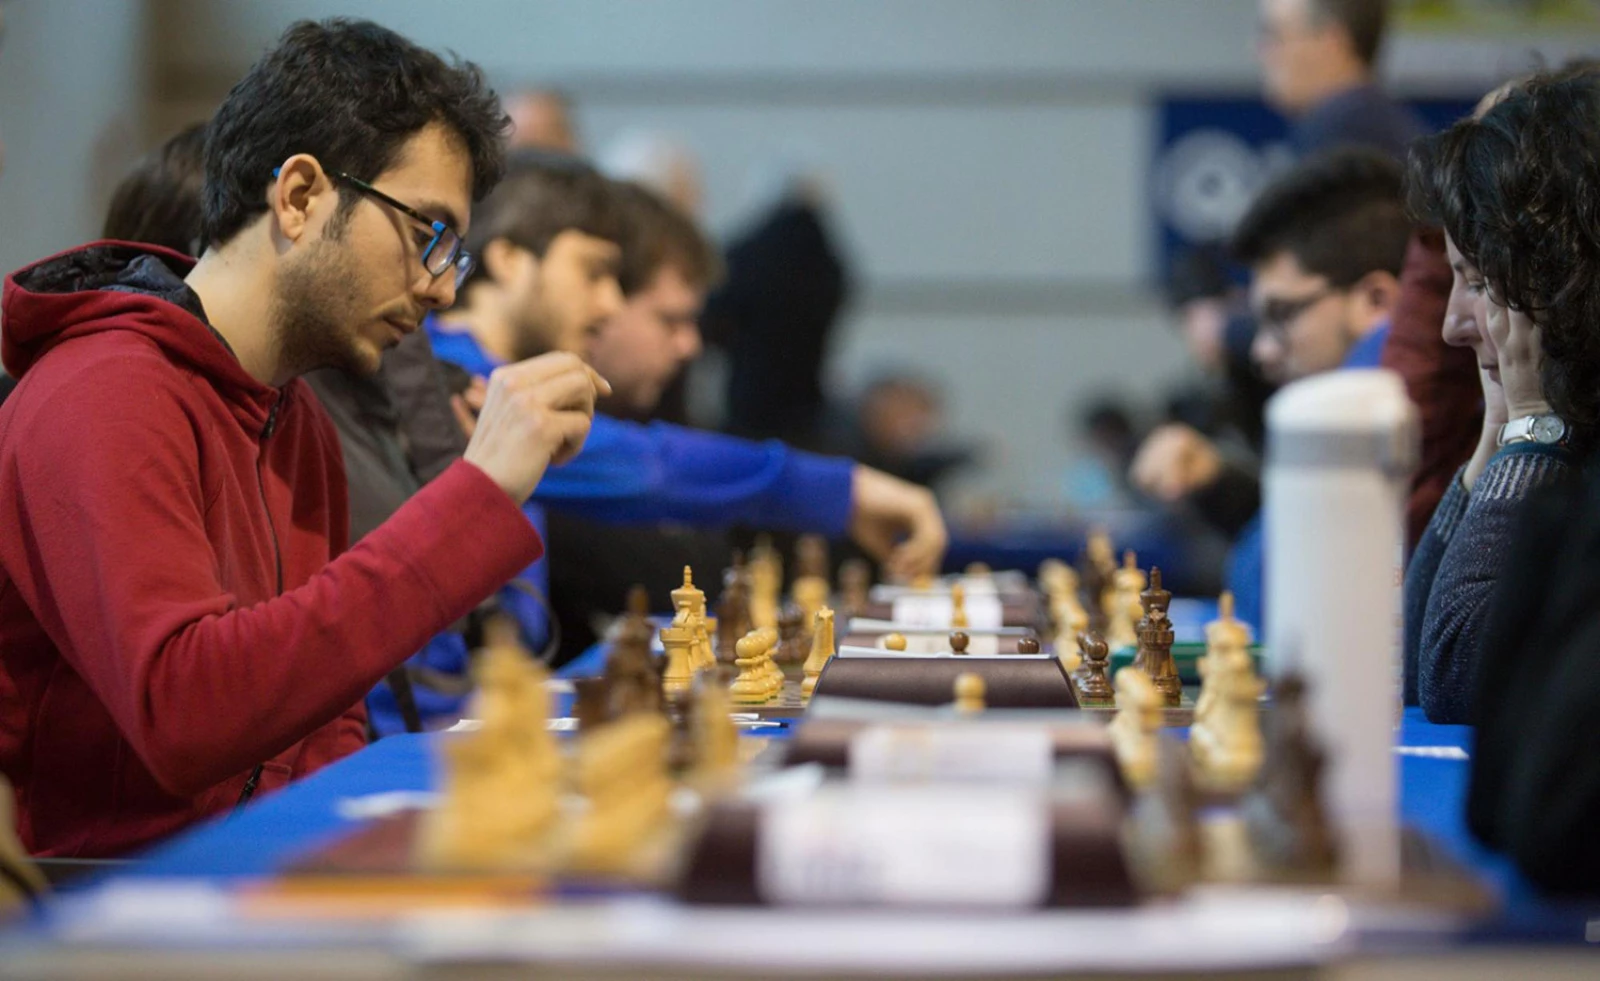 Monthly Open Chess tournament – Make Your Move